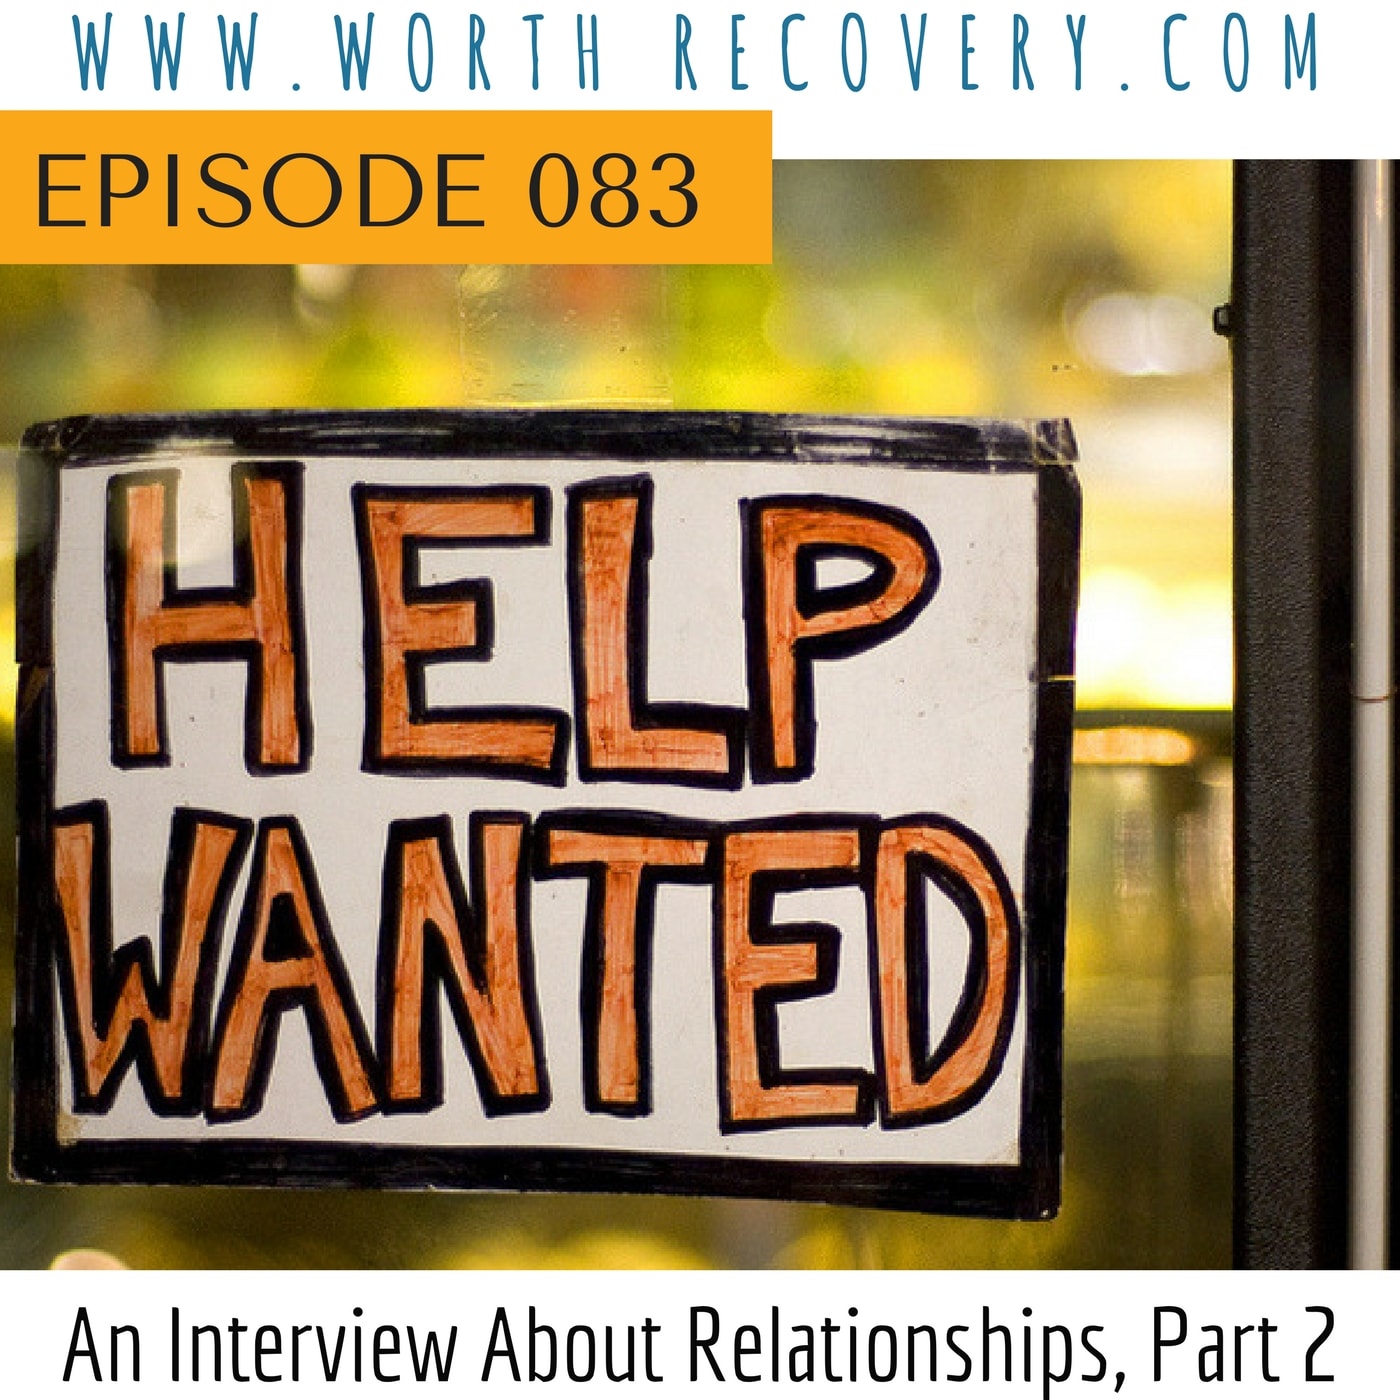 Episode 083: Help Wanted, Part 2